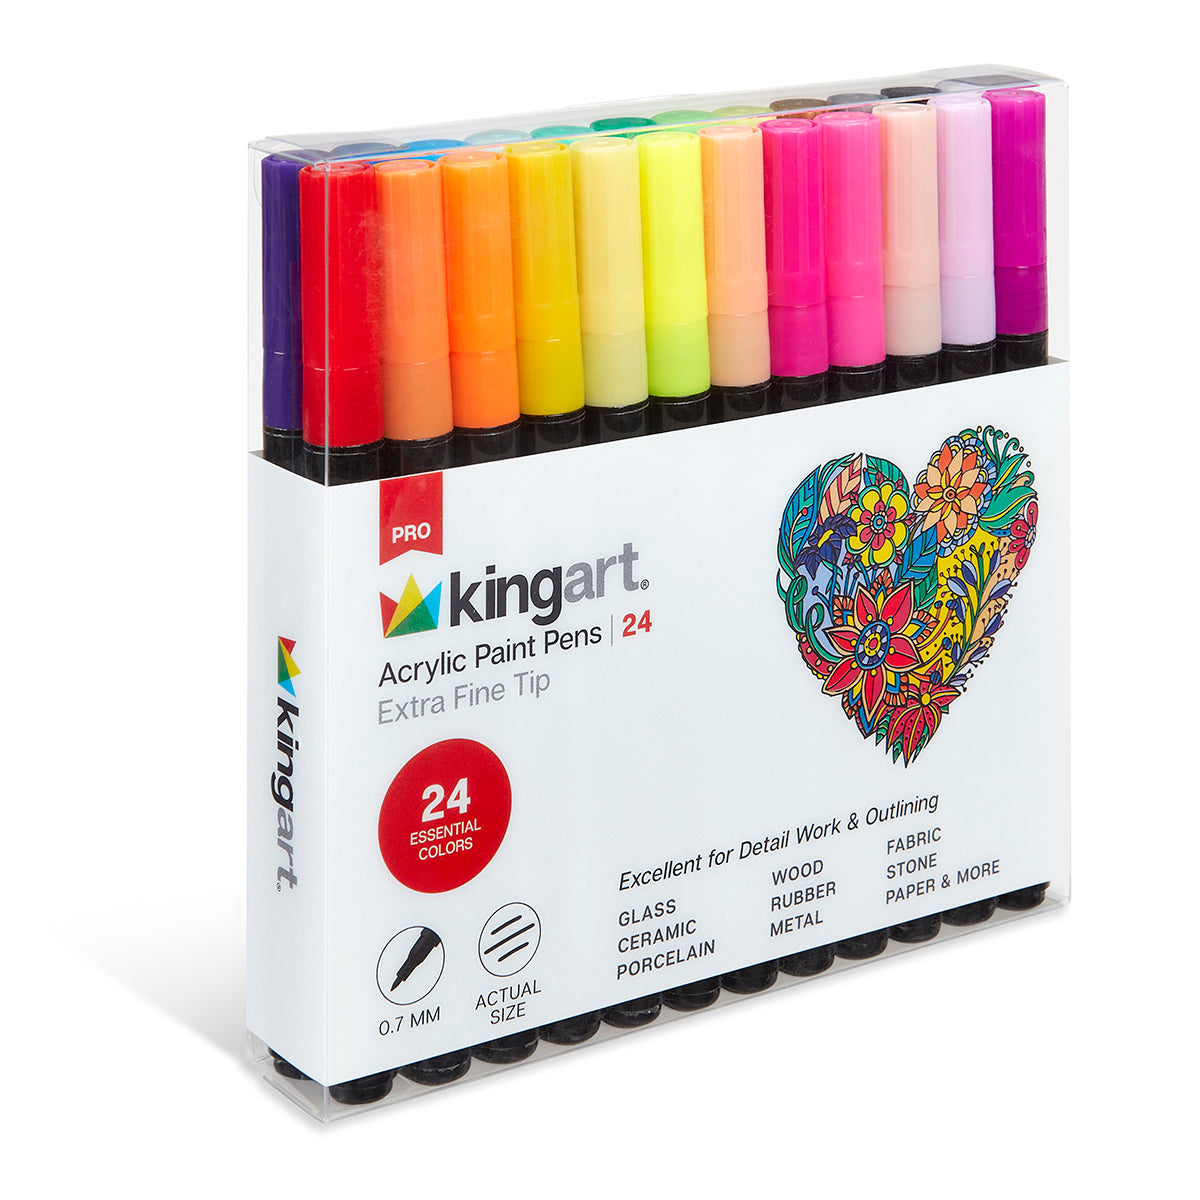 artugn 24 colors acrylic paint pens, dual tip pens with medium tip and  brush tip, paint